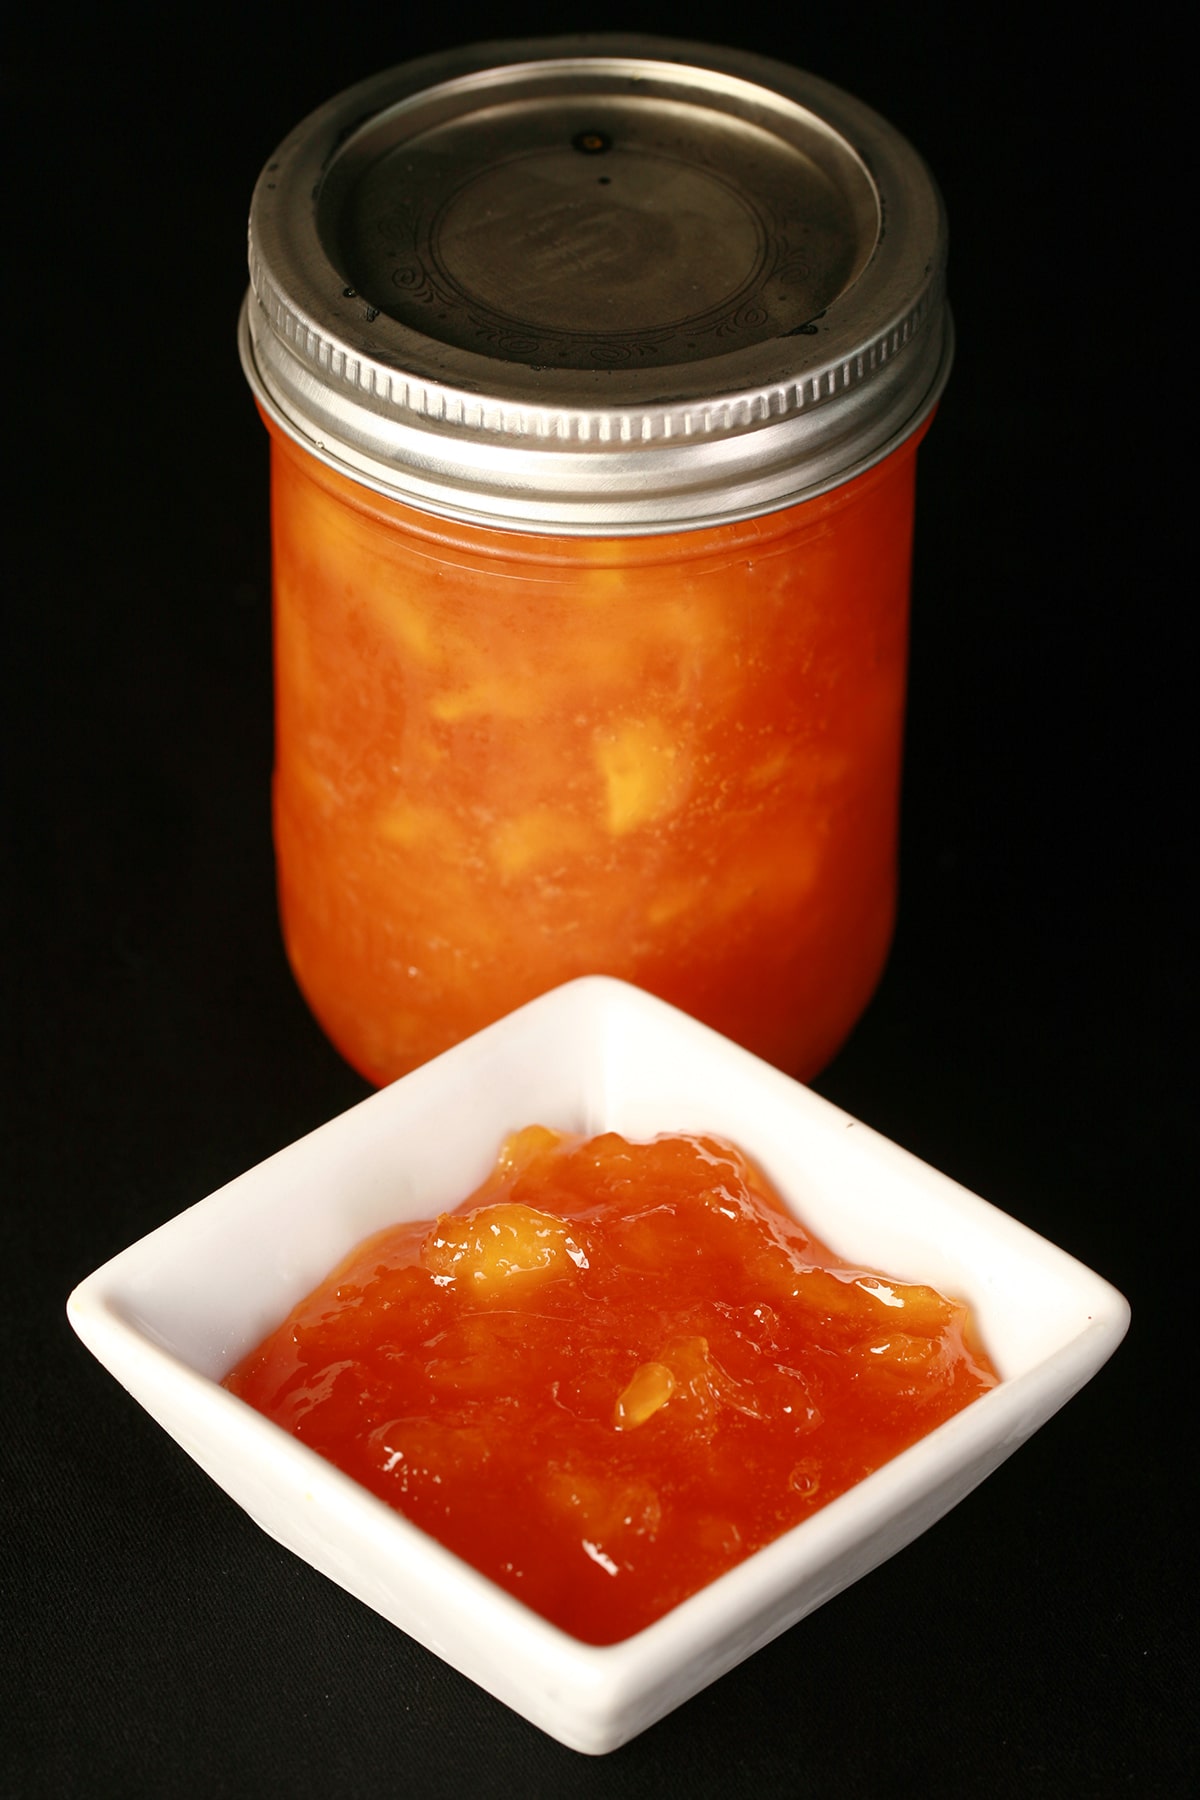 A jar of chunky peach jam, next to a small bowl of the jam.